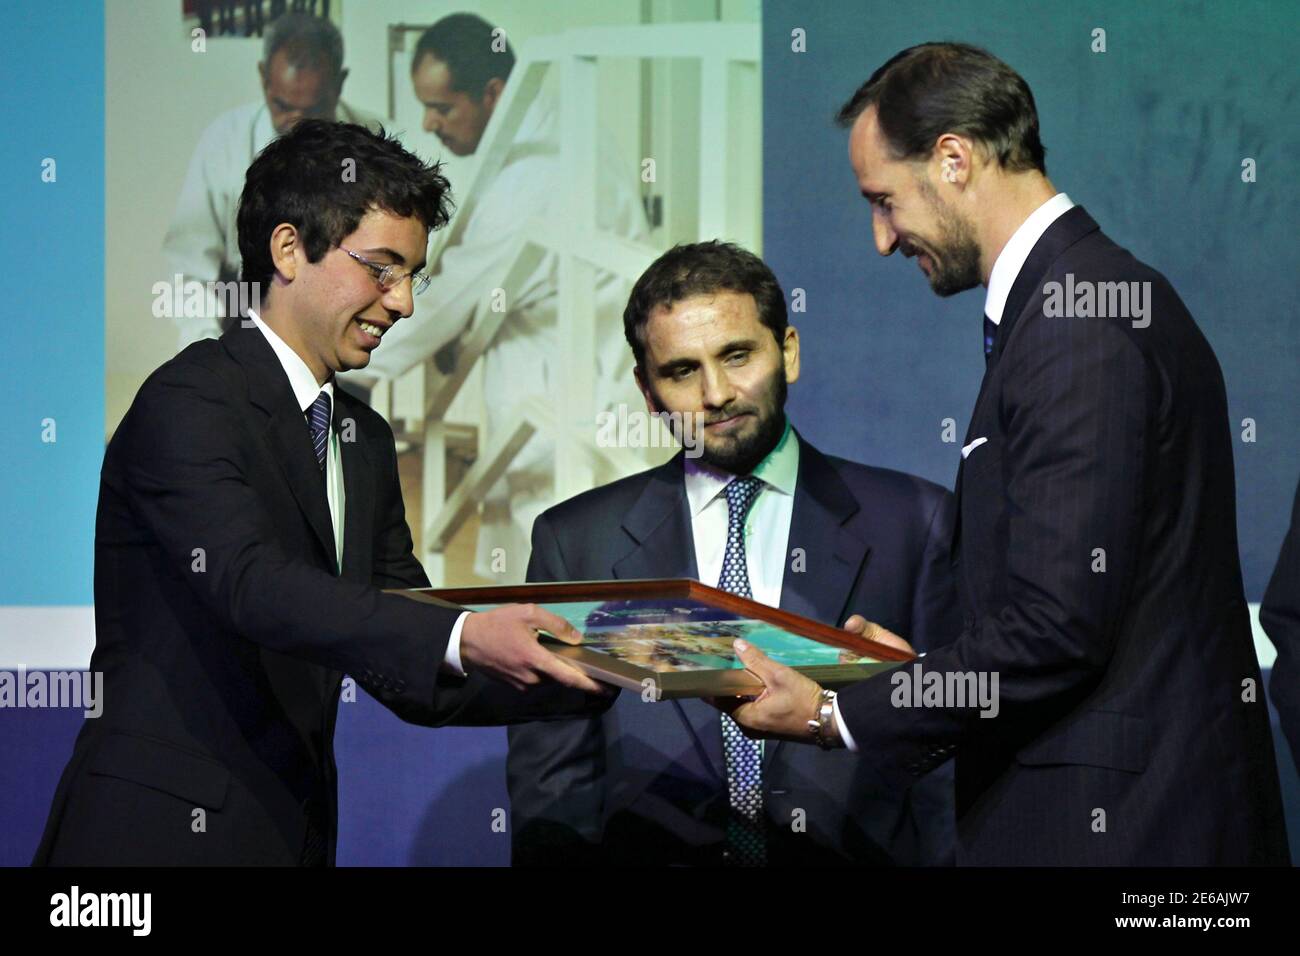 Jordan's Crown Prince Hussein bin (L) presents a token of to Norway's Prince Haakon for his support in by the Jordan Free of Minefields at its event at